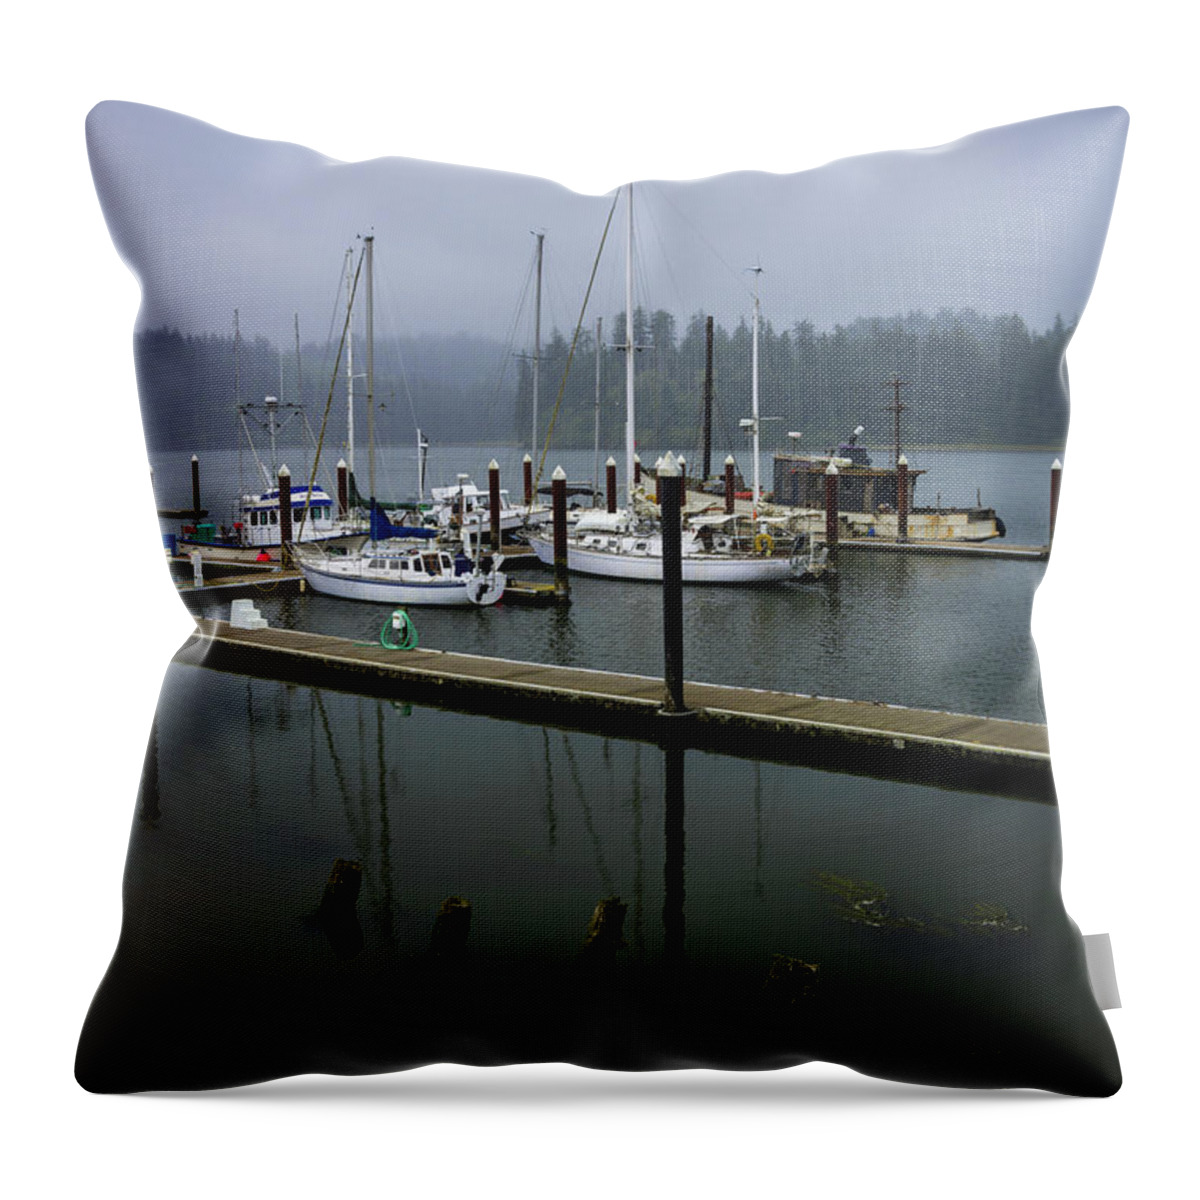 Photography Throw Pillow featuring the photograph Foggy Florence by Steven Clark